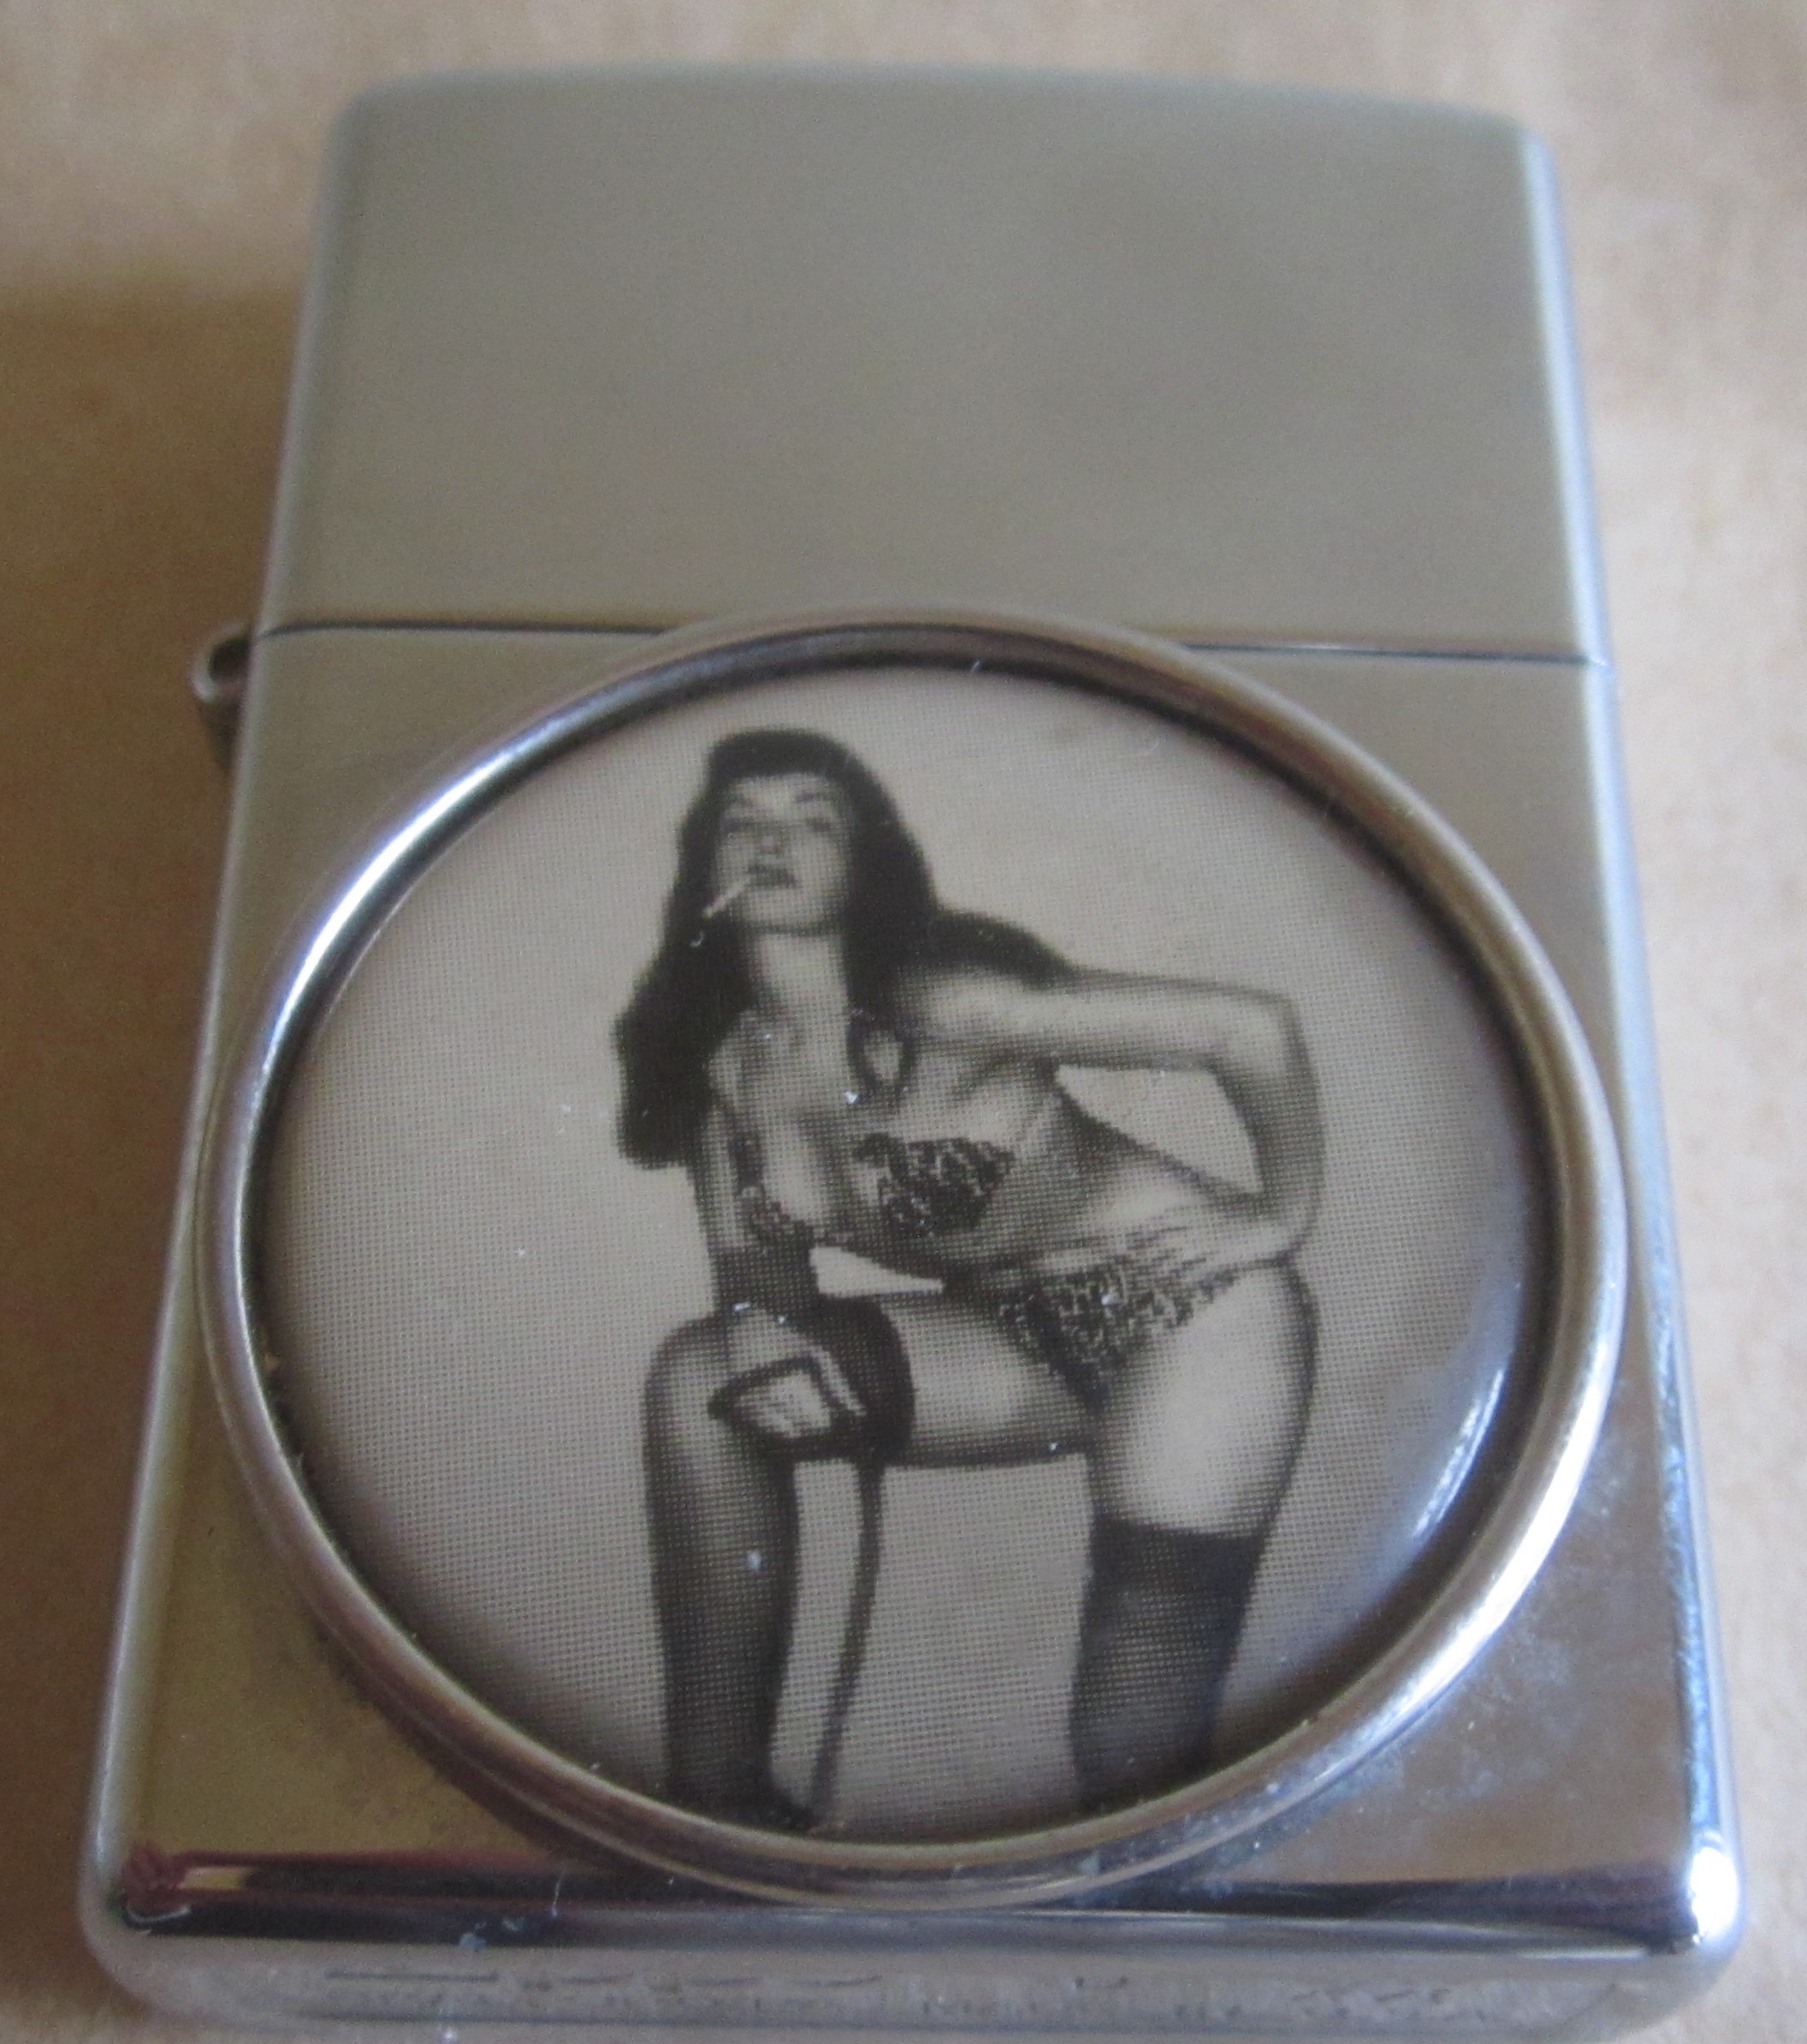 ADULT GLAMOUR - BETTIE PAGE ZIPPO LIGHTER